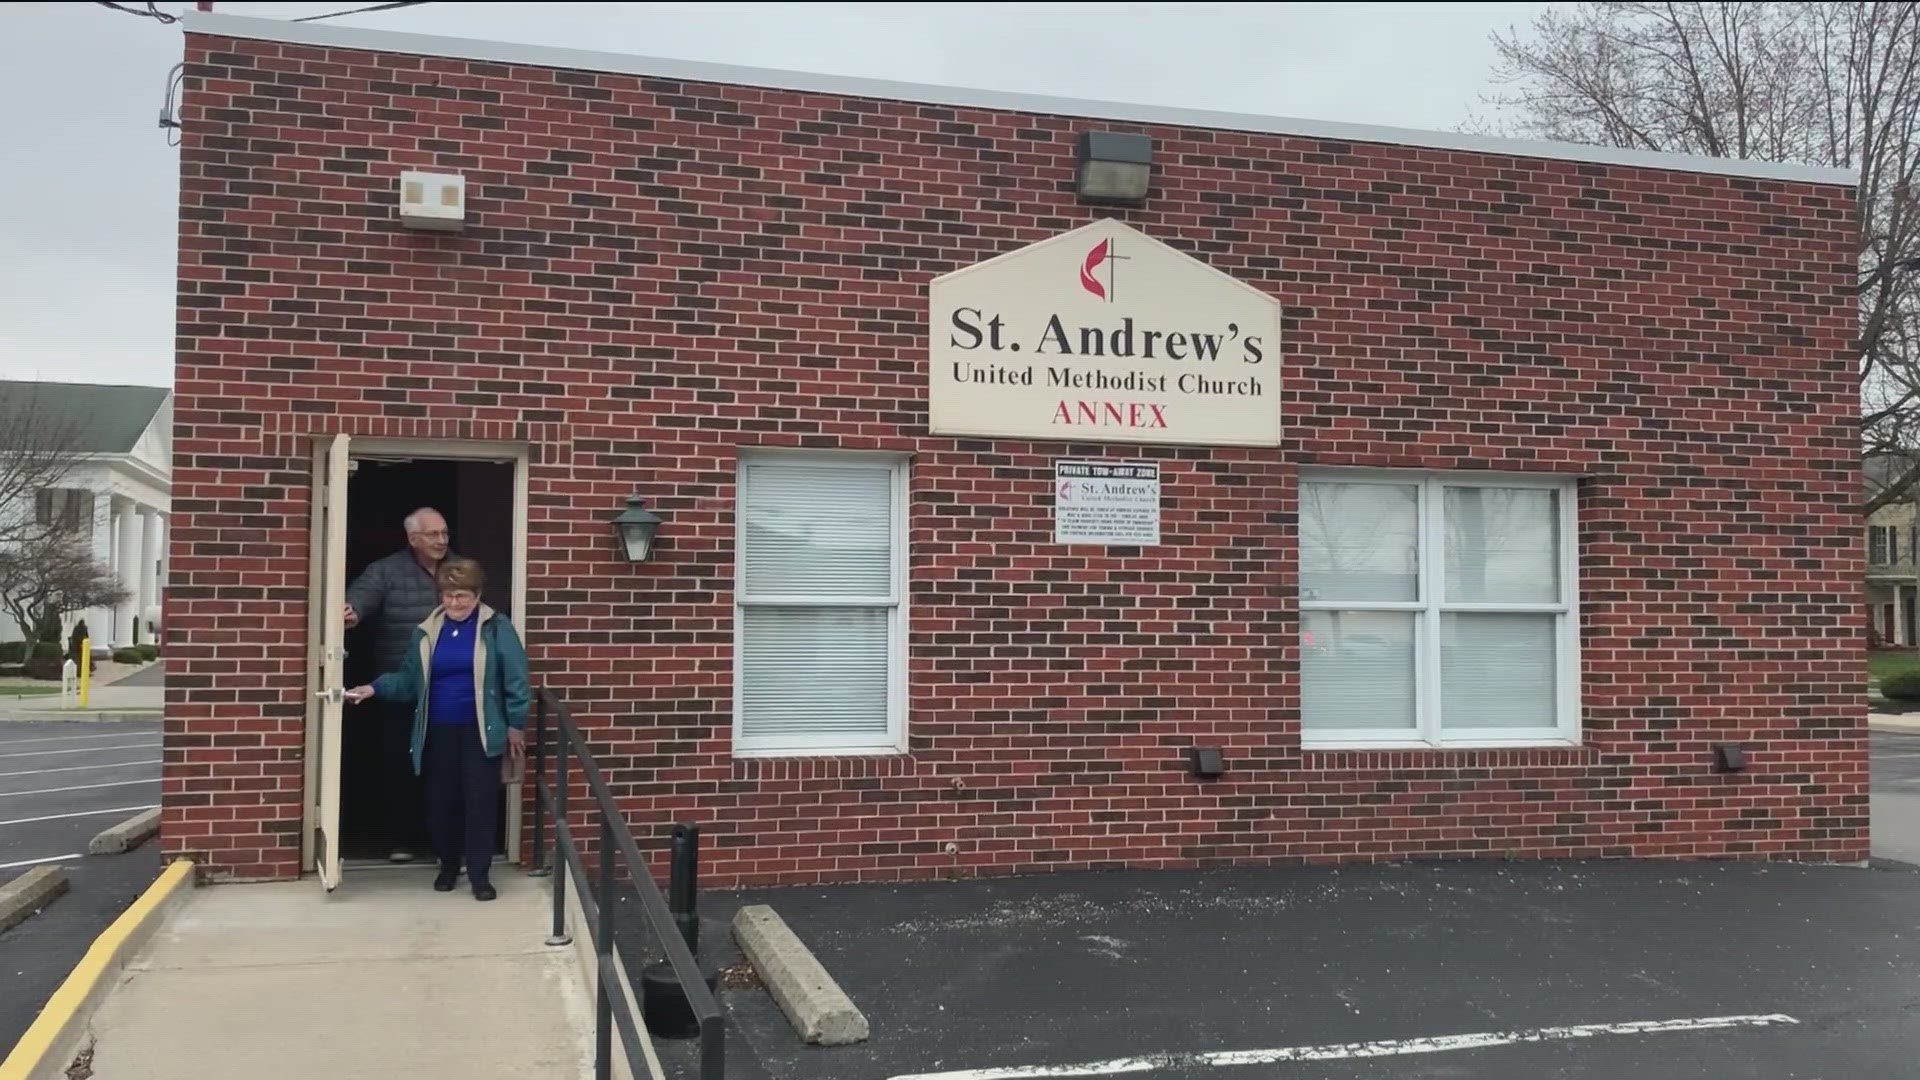 The laundry facility will be open every Tuesday and Thursday at the Saint Andrew's Church Annex from 9 a.m. to 3 p.m.